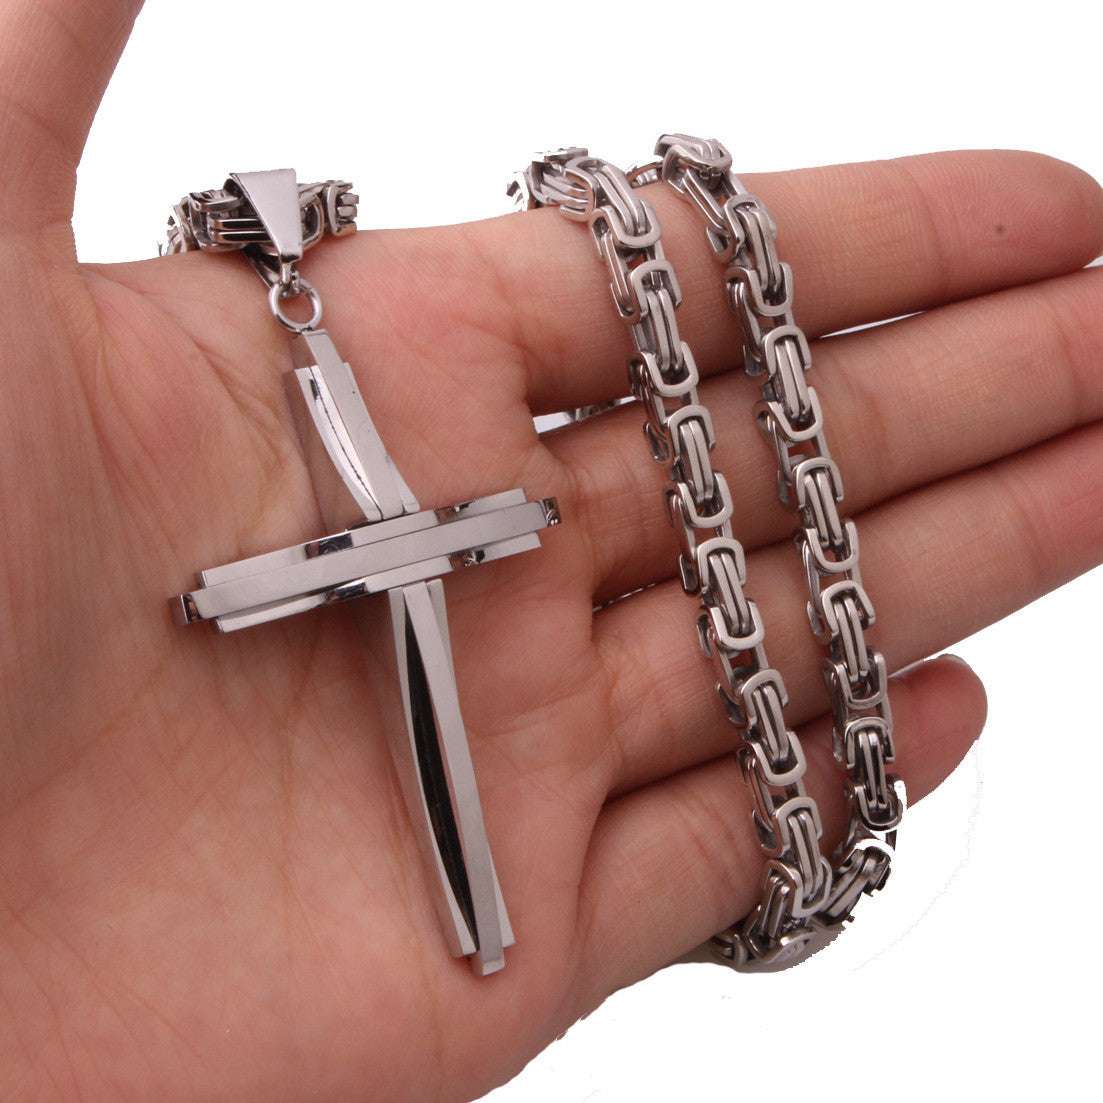 5mm Chain Necklace, Handmade Cross Pendant, Stylish Pendant Necklace - available at Sparq Mart